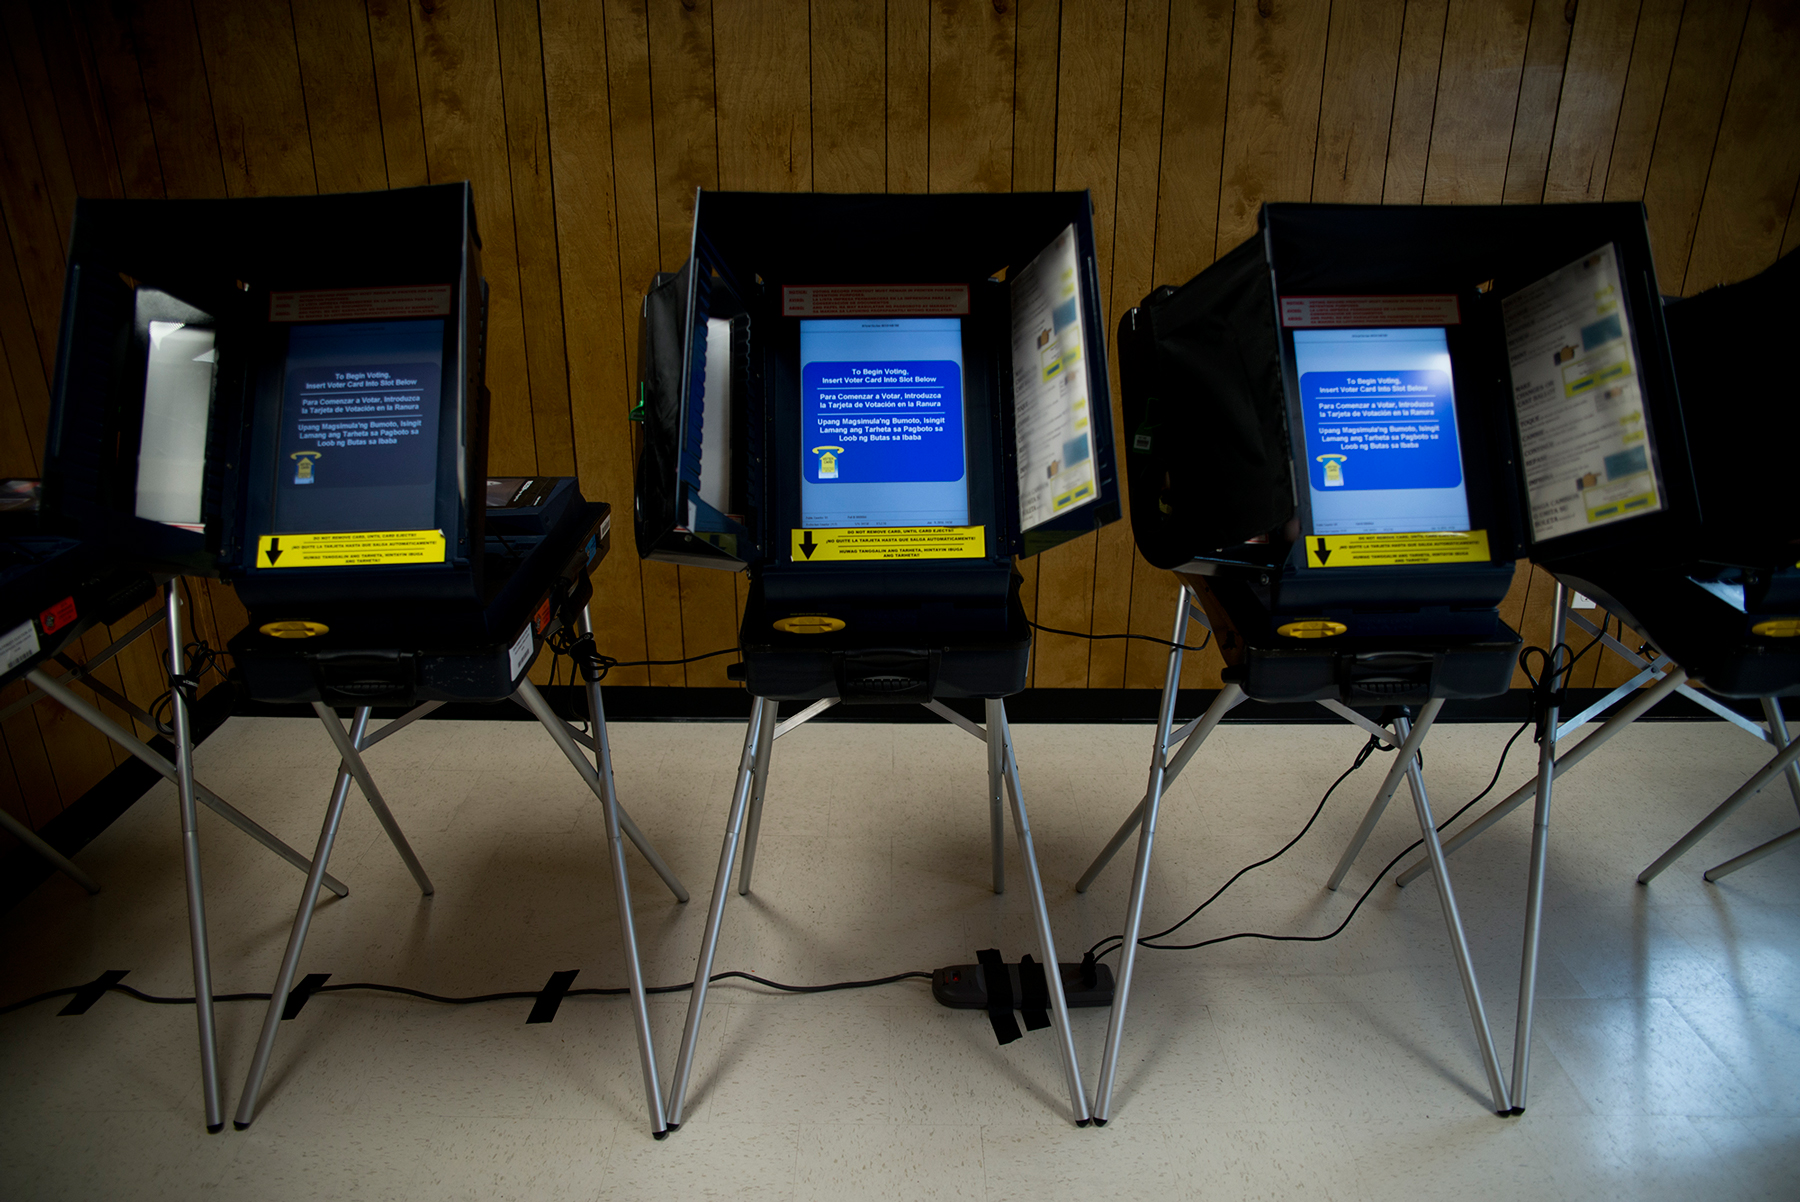 Voting is done electronically throughout Nevada. Two weeks of early voting are offered before primary and general elections. (Roman Knertser/News21)